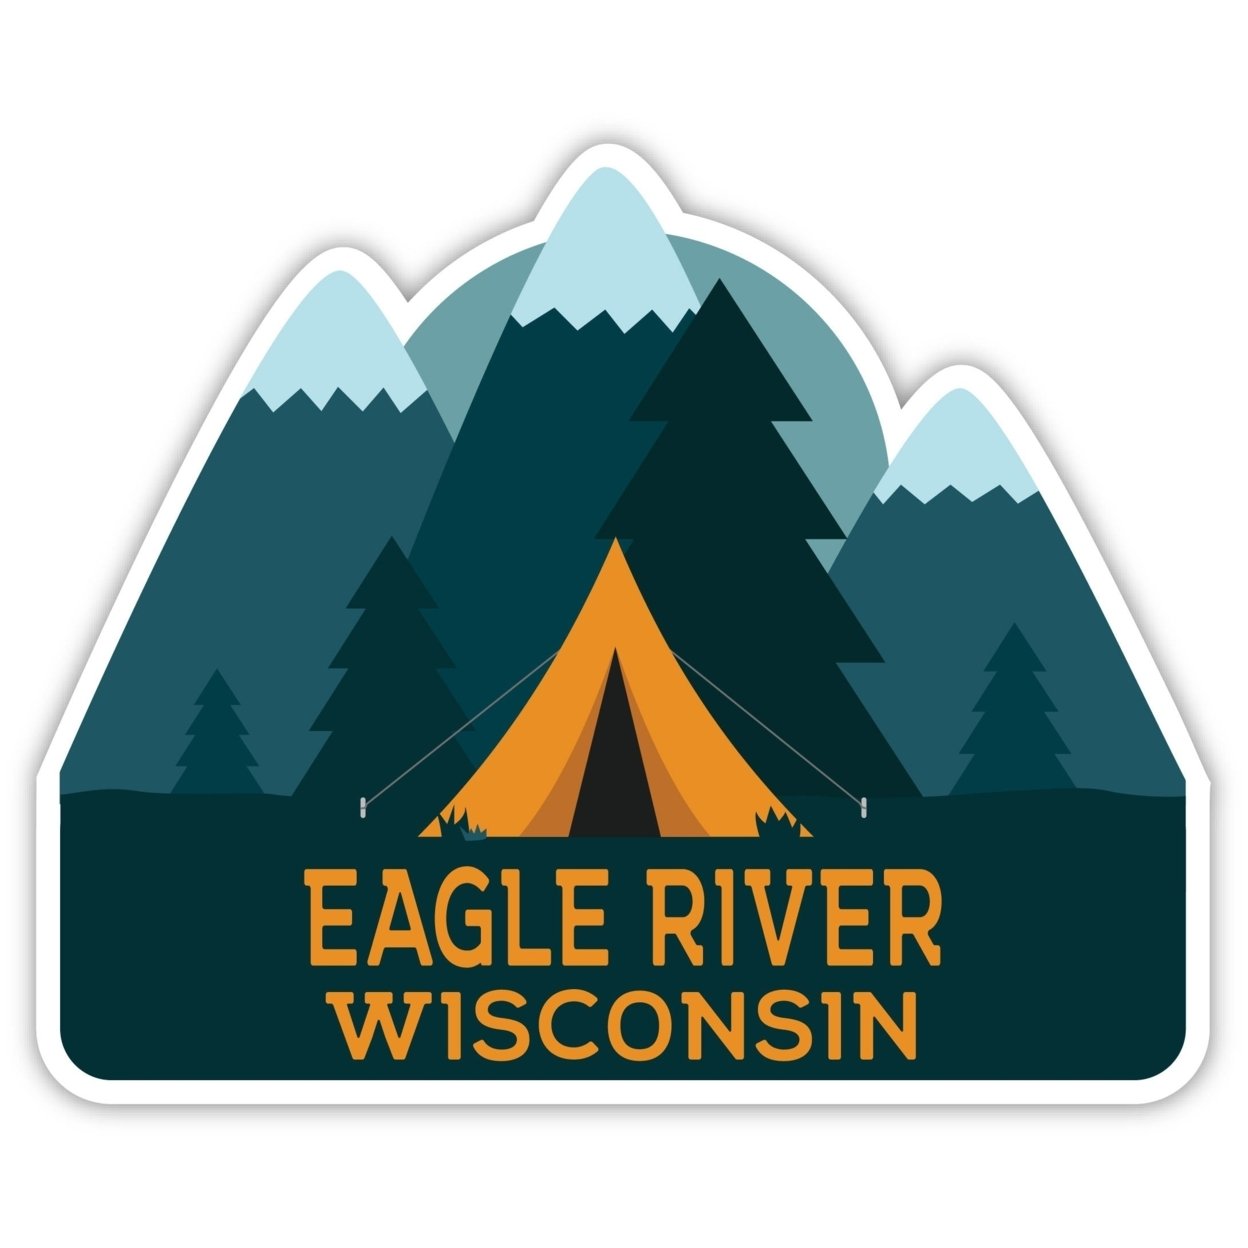 Eagle River Wisconsin Souvenir Decorative Stickers (Choose Theme And Size) - 4-Pack, 12-Inch, Adventures Awaits